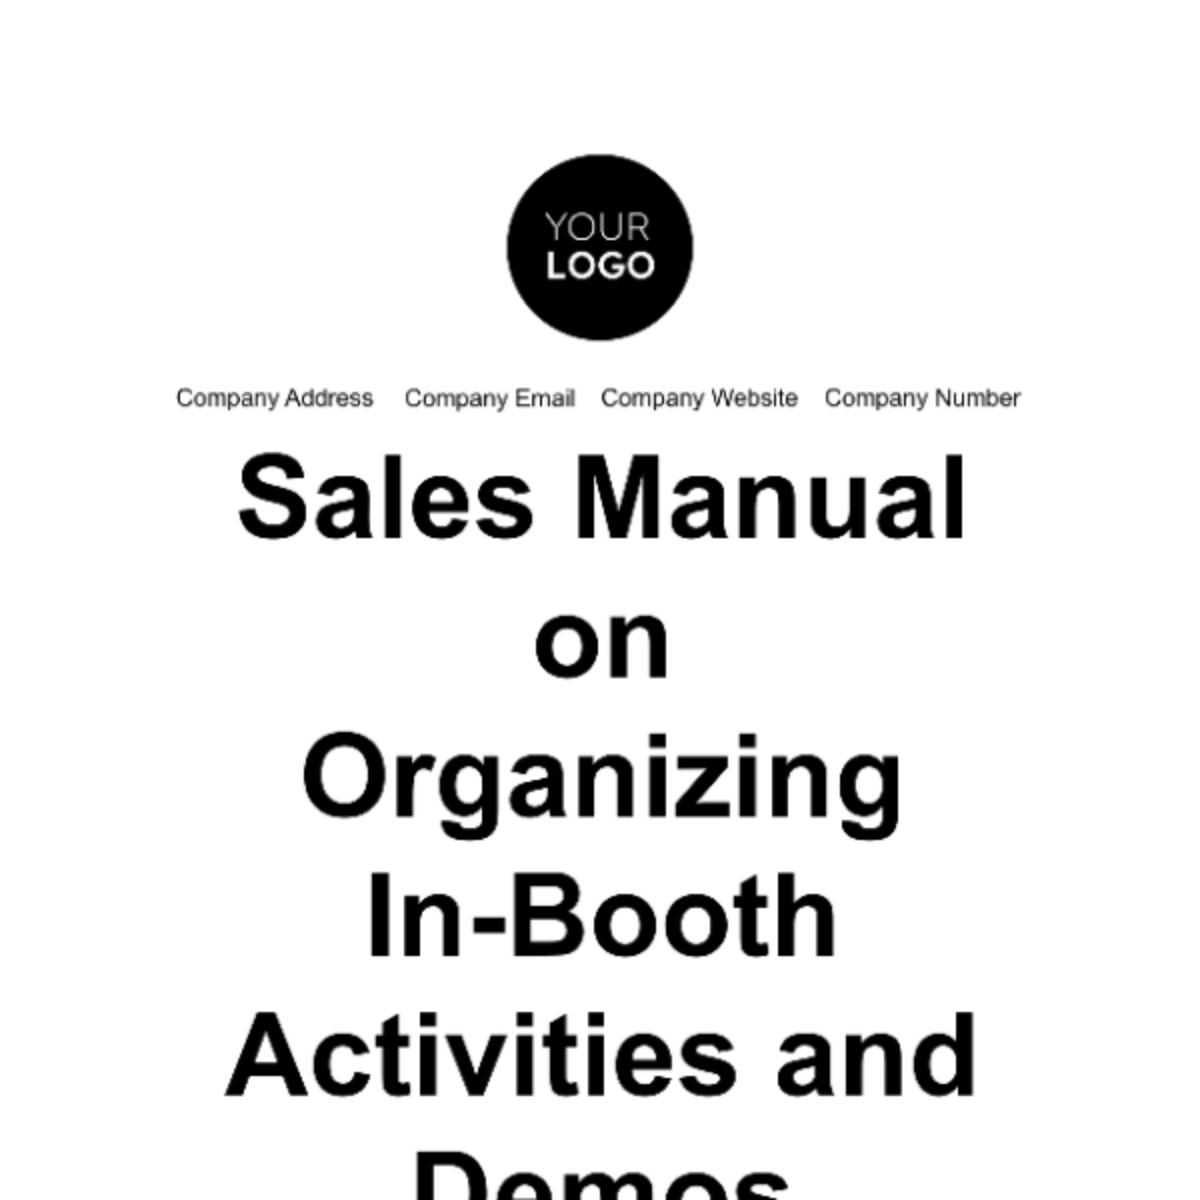 Free Sales Manual on Organizing In-Booth Activities and Demos Template